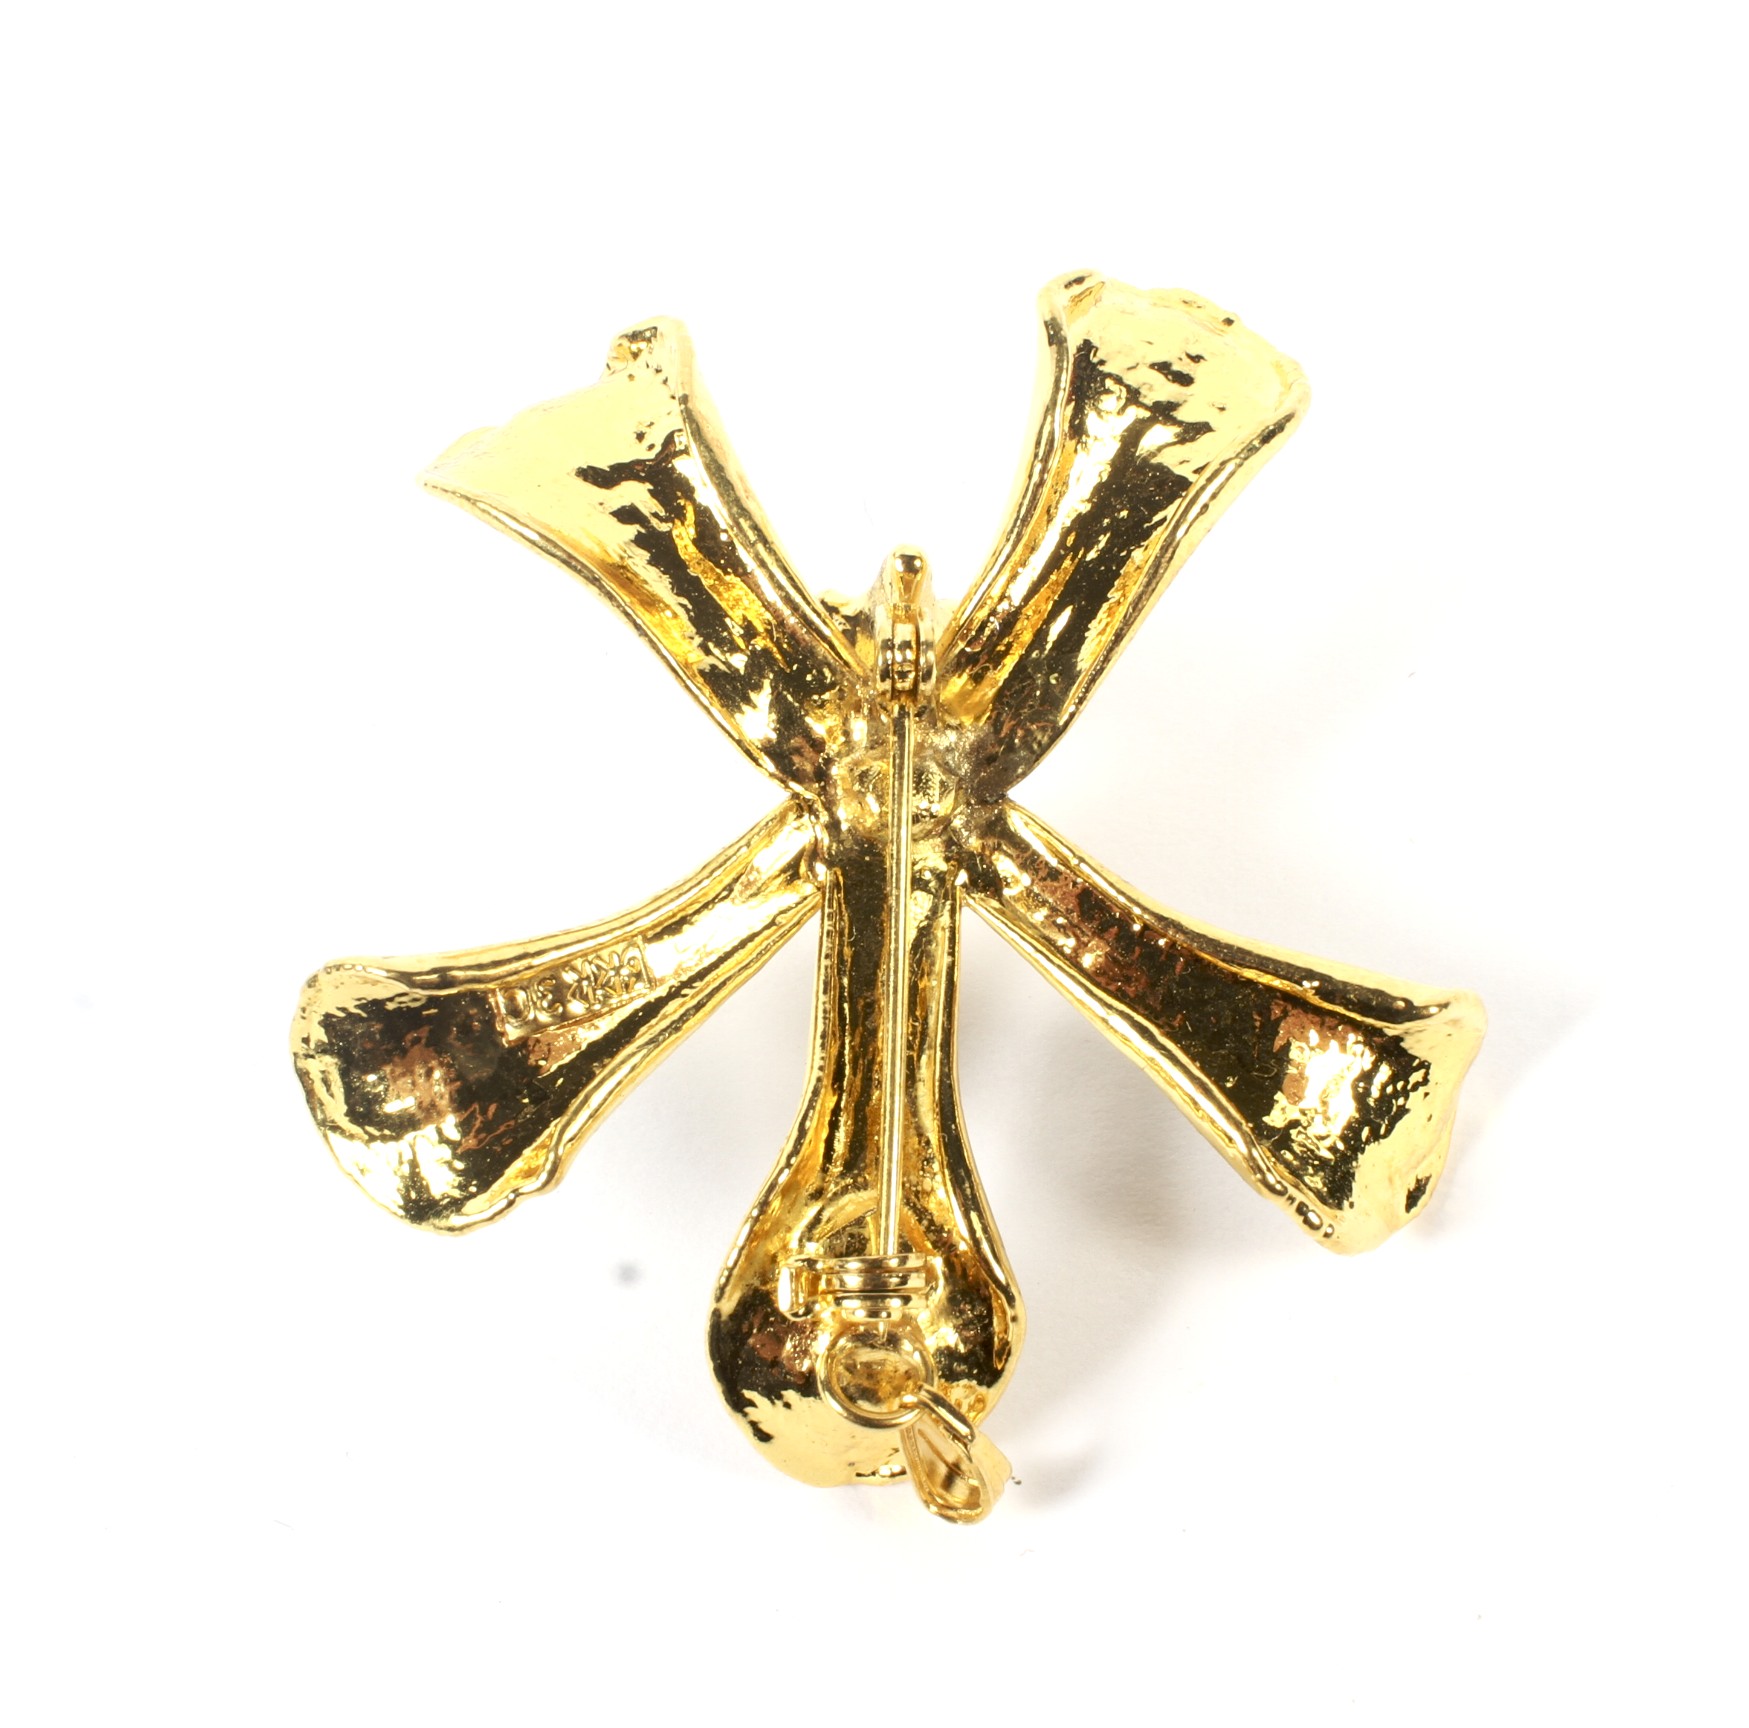 A Far Eastern gold-plated 'Black Orchid' brooch/pendant. Marked 'Risis 3C', approx. - Image 2 of 2